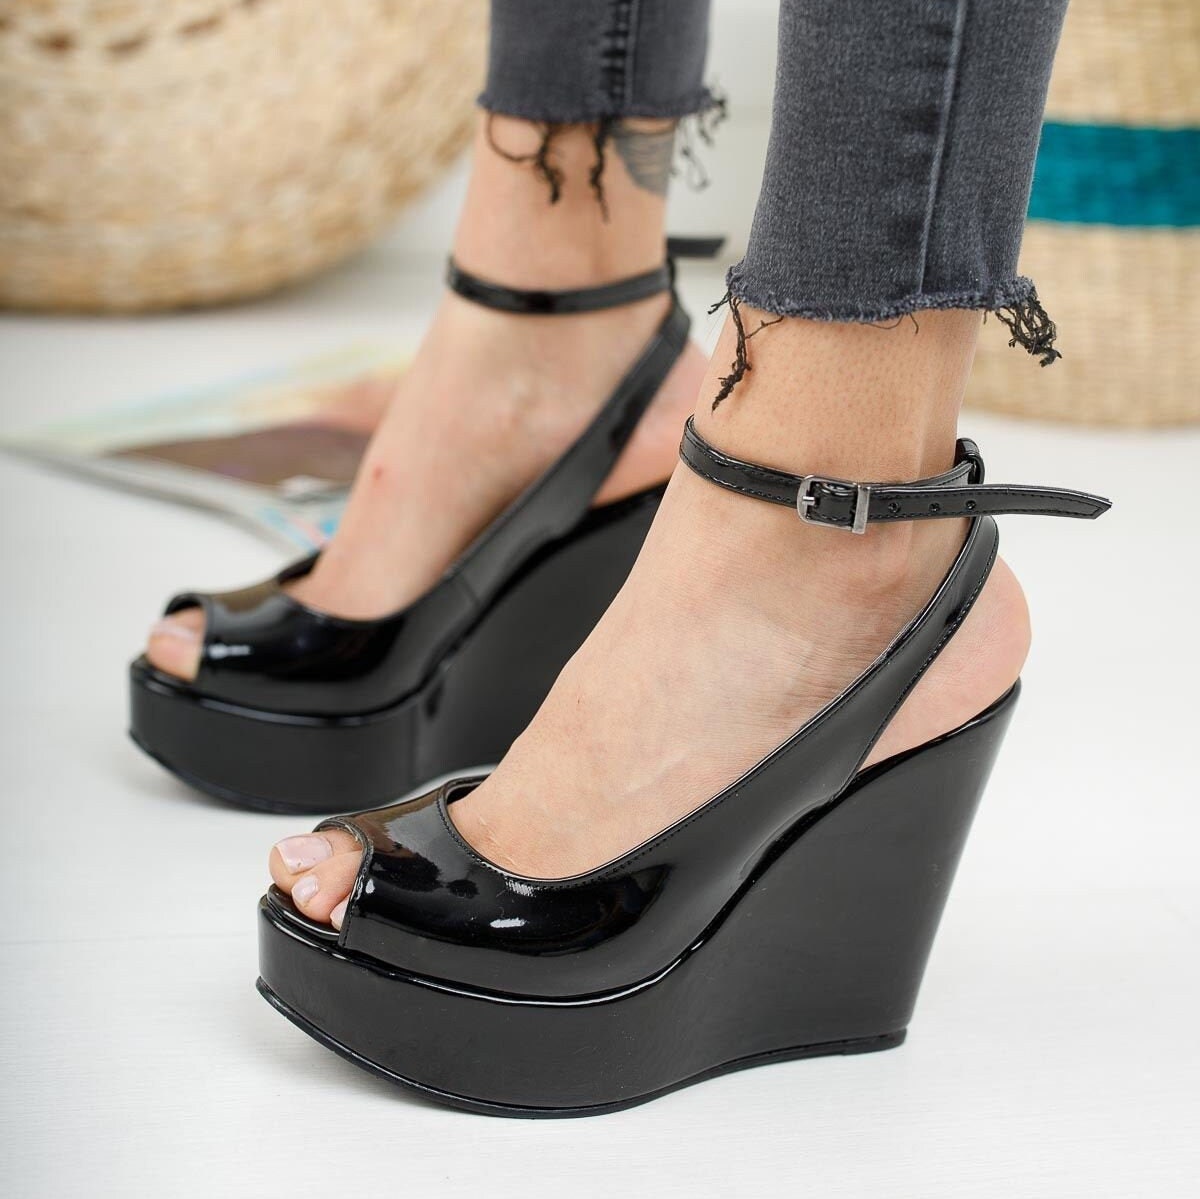 Aggregate more than 200 wedge heel sandals closed toe super hot